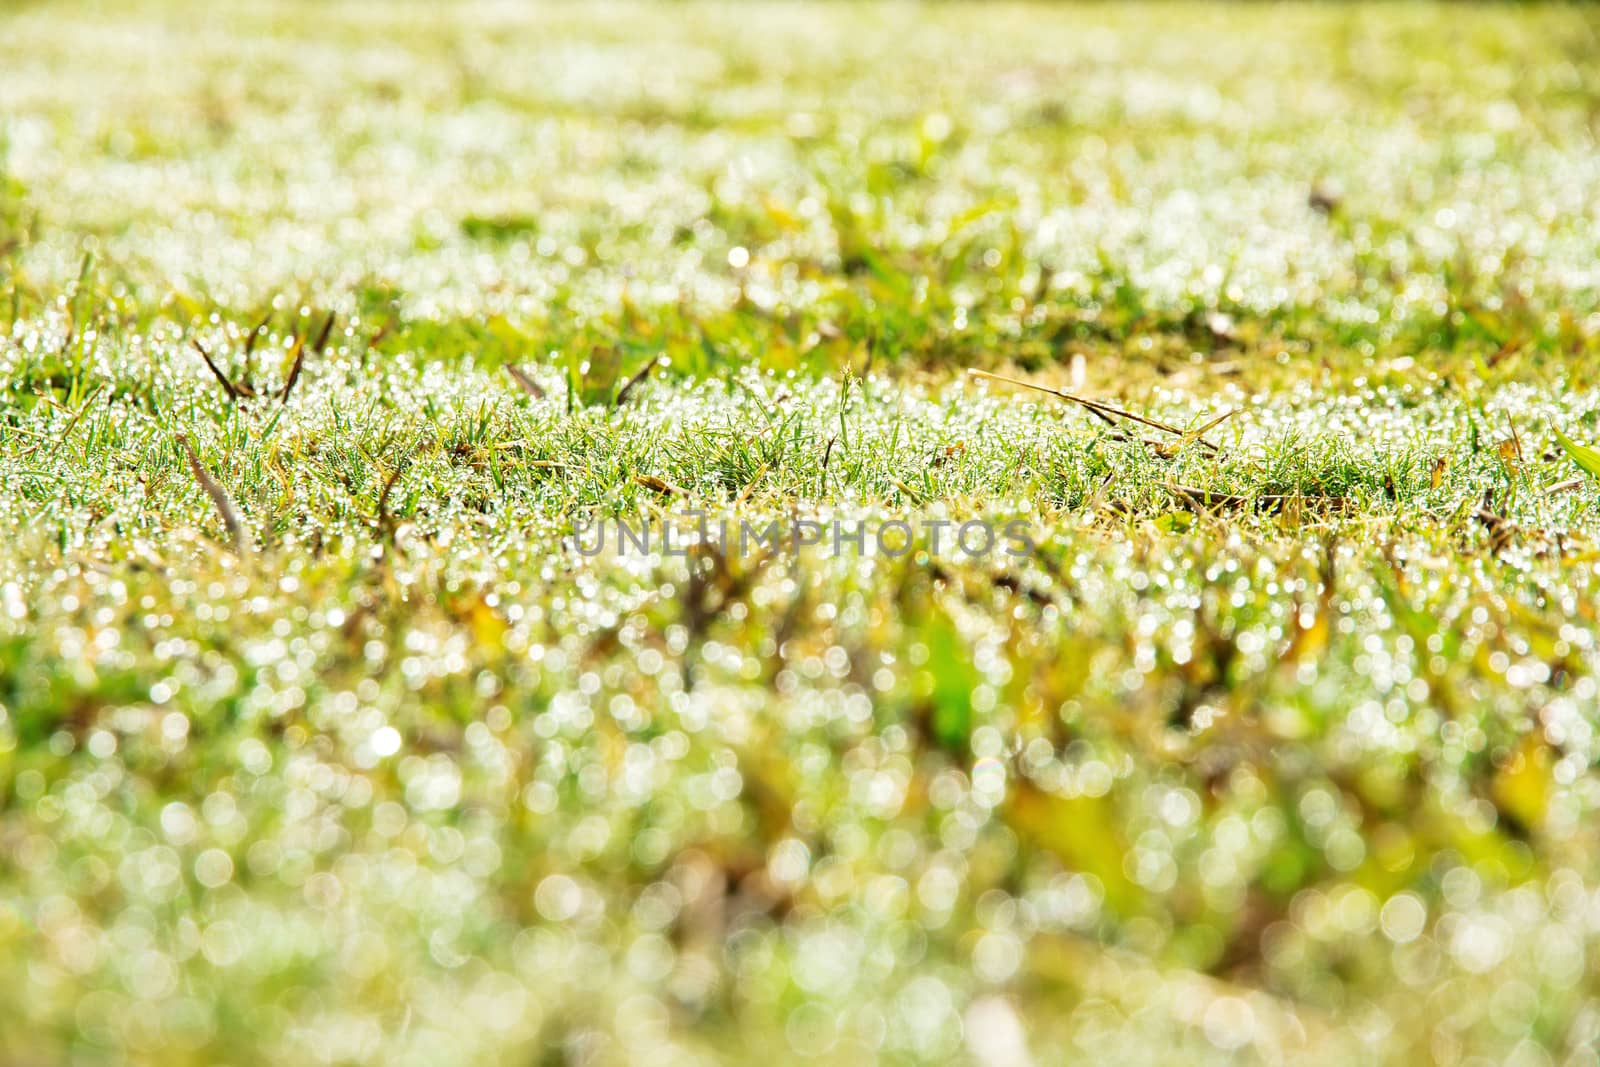 close up image of fresh spring green grass